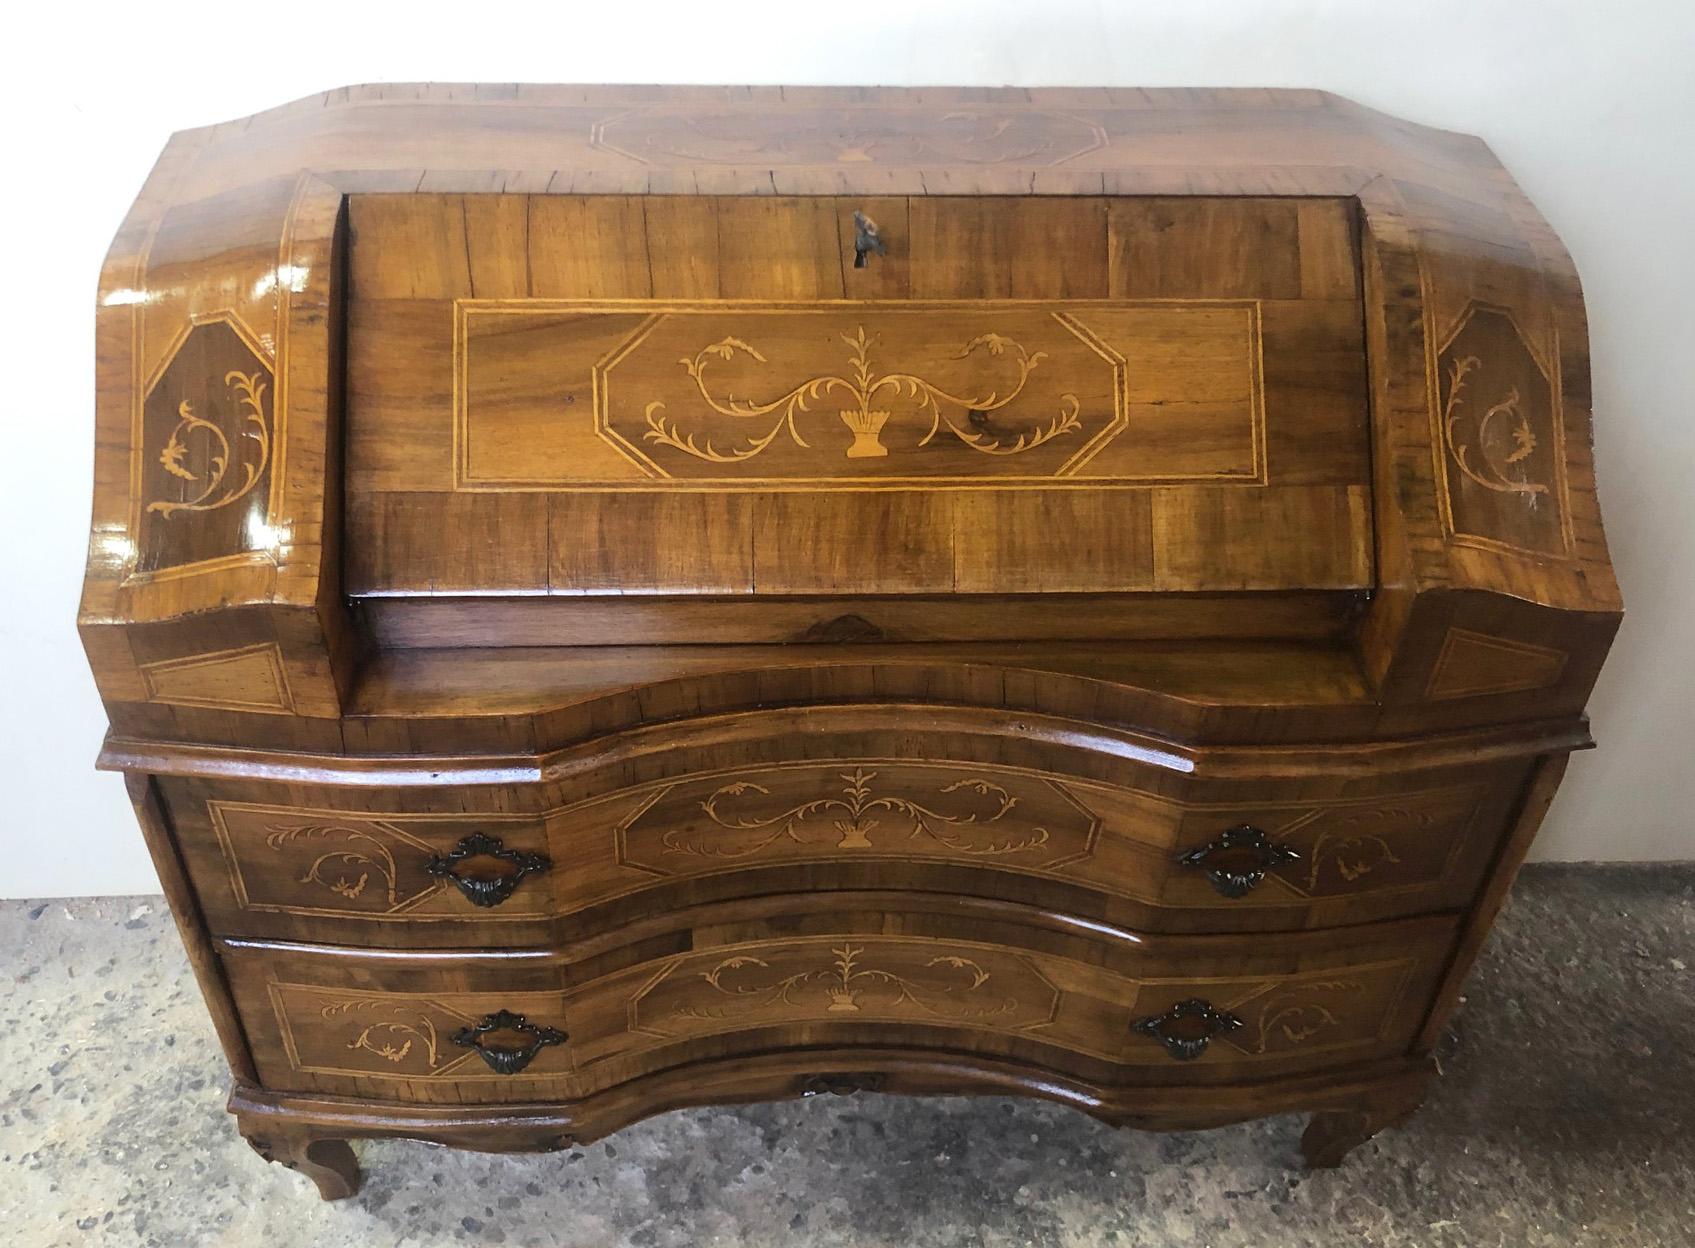 Inlaid walnut sideboard flap from 1950, original Italian, with drawers, natural color.
With 4 small drawers inside at the top.
The piece of furniture is very useful and versatile, of limited size.

To find out the cost of transport to USA etc write